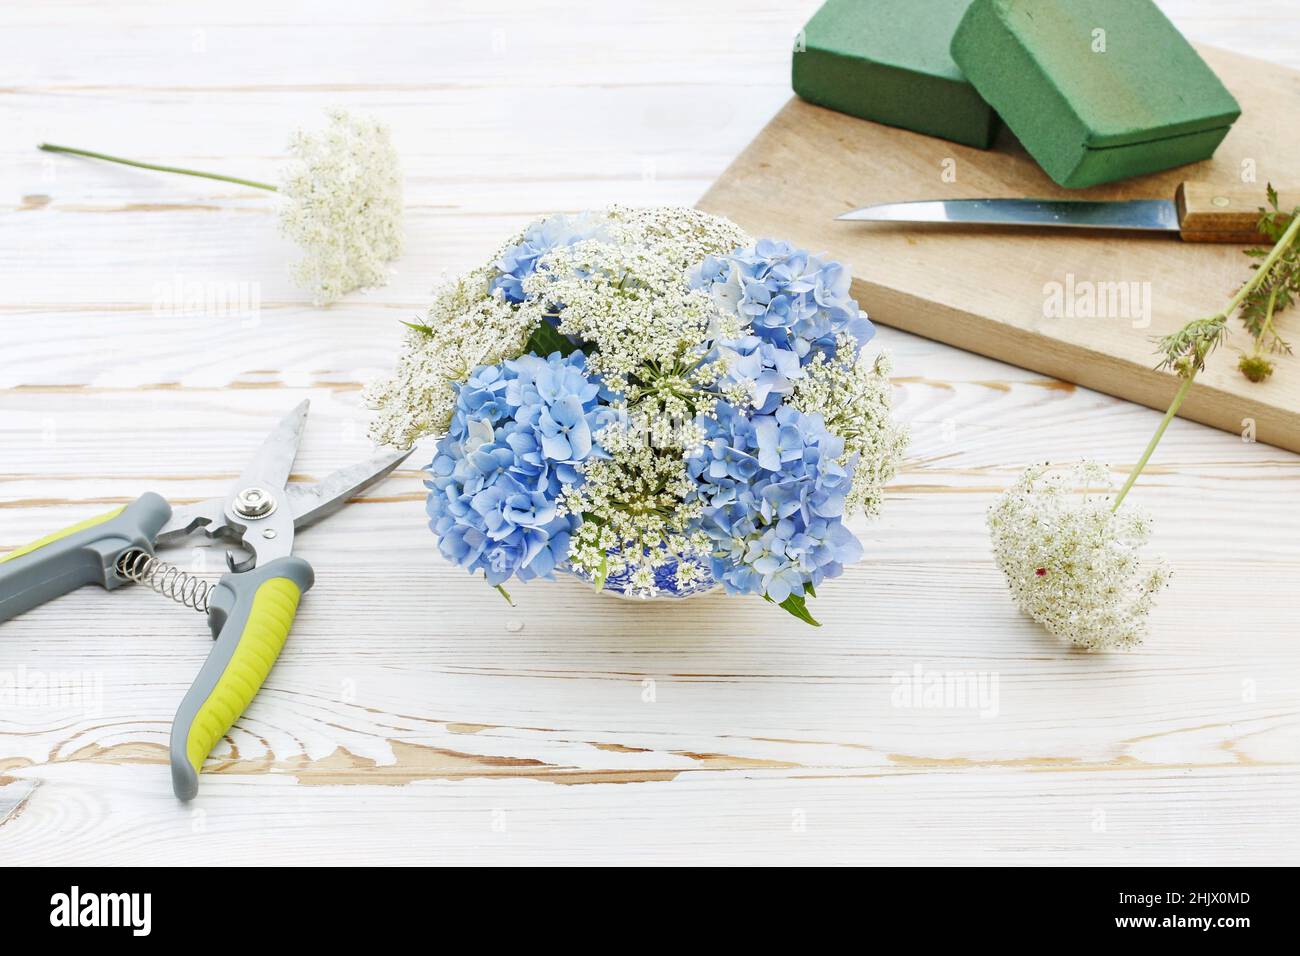 Florist at wotk: How to make floral arrangement with blue hortensia (hydrangea) and white Queen Anne's lace (daucus carota) flowers on white wooden table. Step by step, tutorial. Stock Photo